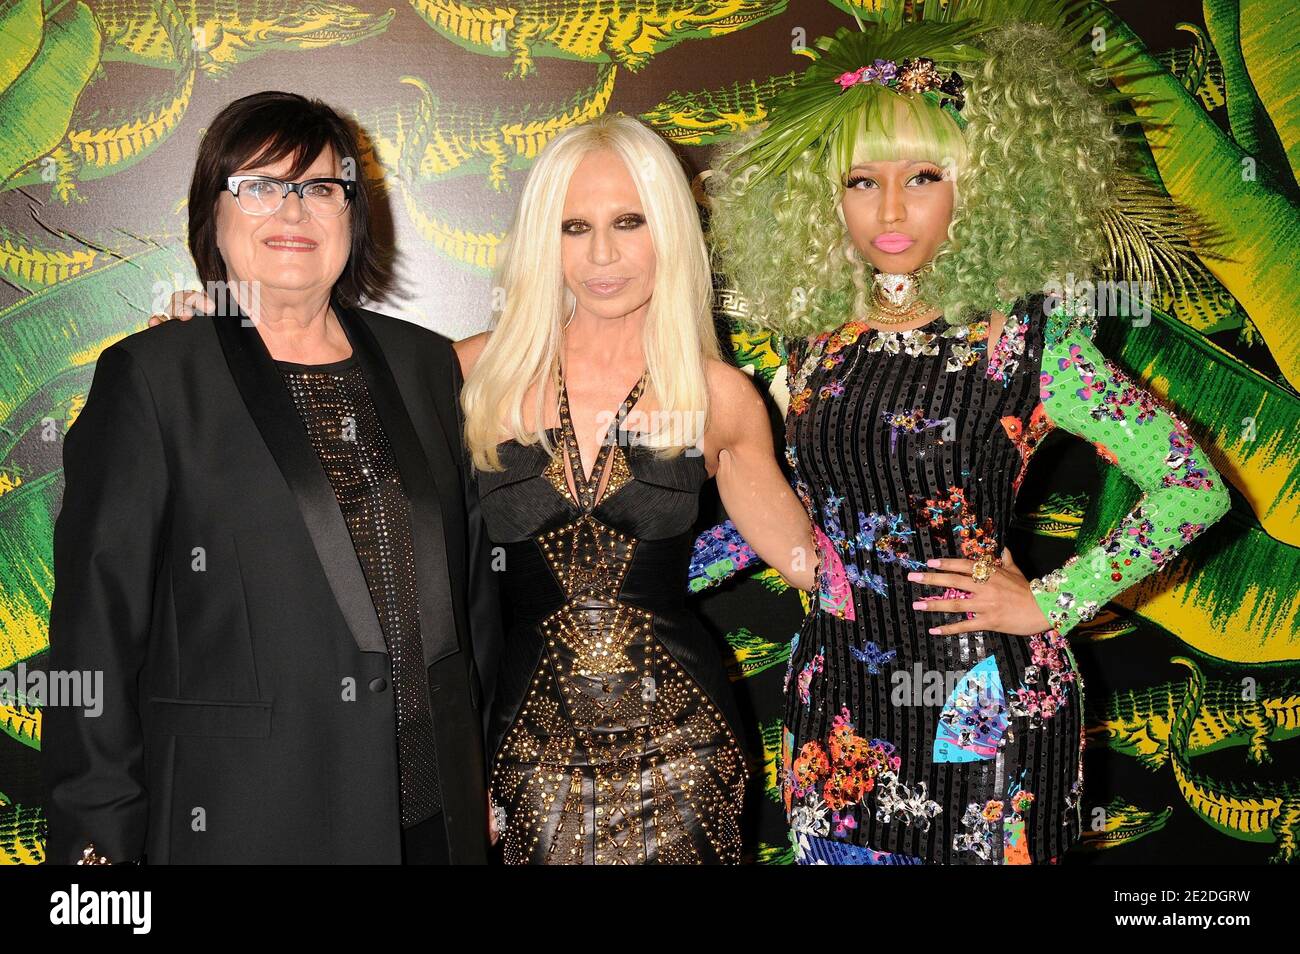 Groen voorraad veerboot Margareta van den Bosch, Donatella Versace, Nicki Minaj attending the  Versace for H&M Fashion Launch Party held at Versace for H&M Hall on the  Hudson in New York City, NY, USA on